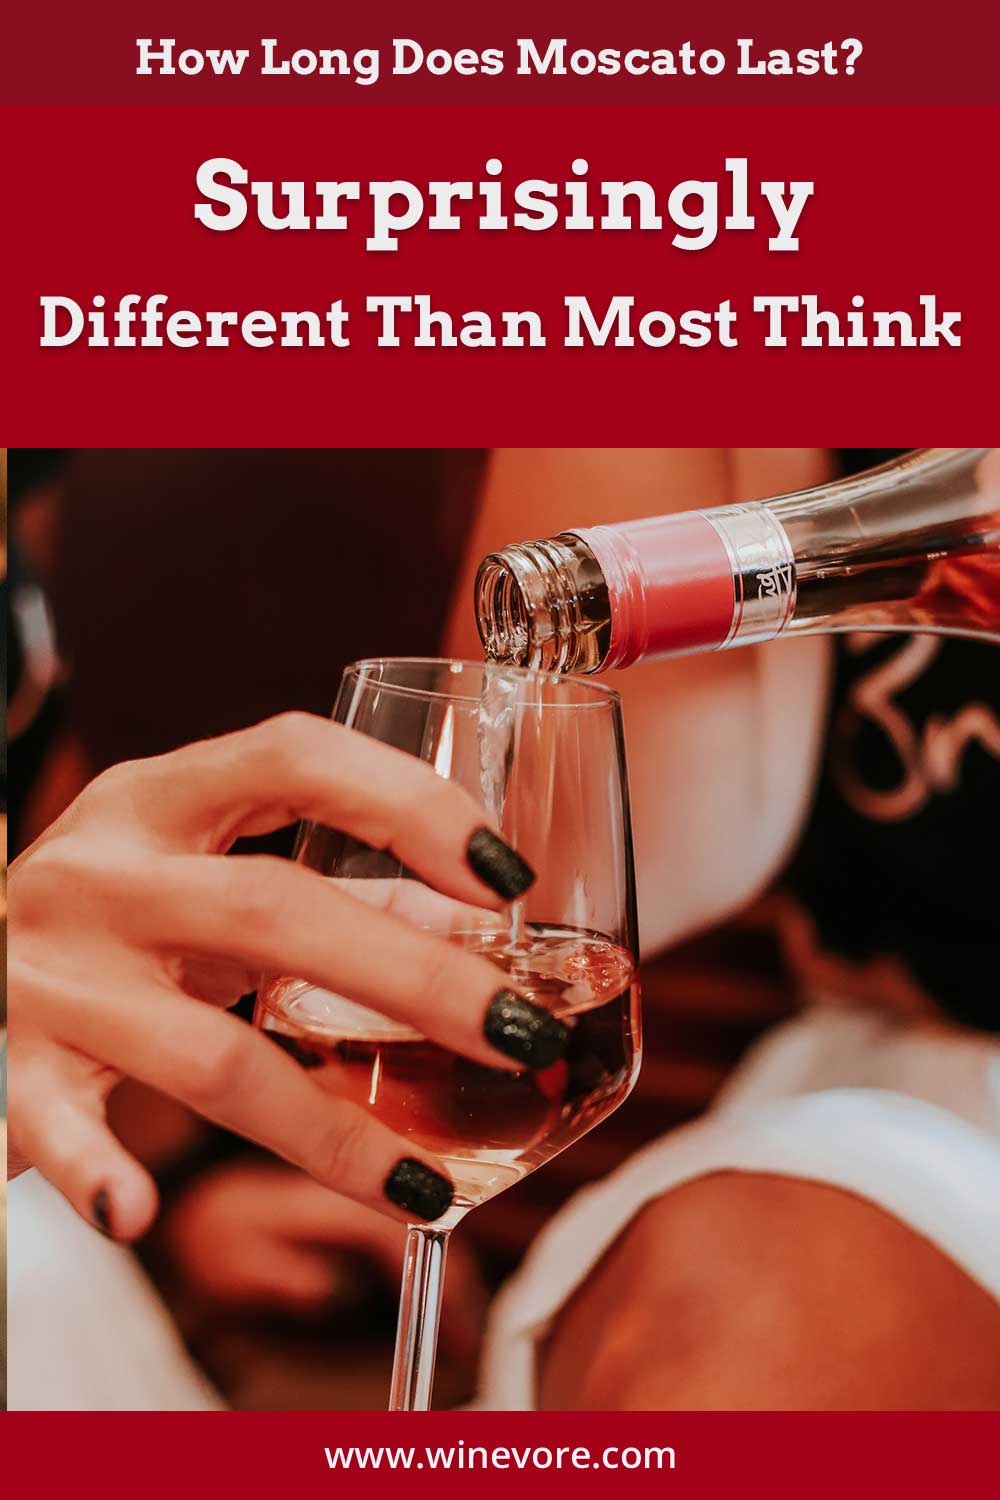 Women holding a wine glass while wine is being poured into it - How Long Does Moscato Last?